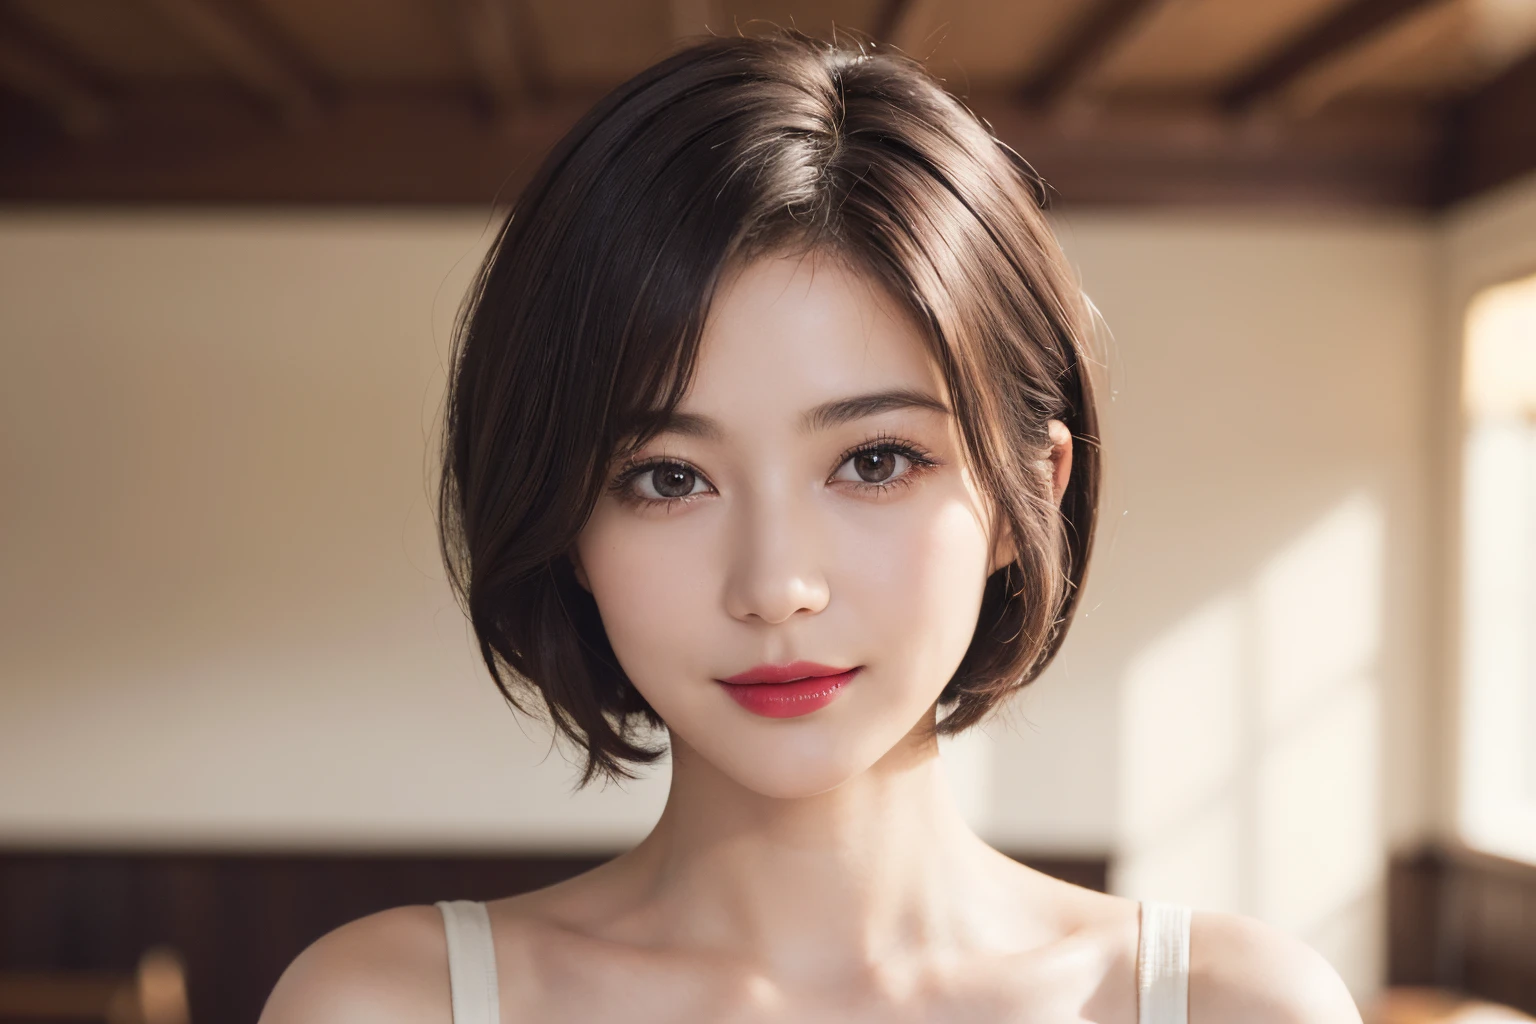 128
(a 20 yo woman, Standing), (A hyper-realistic), (high-level image quality), ((beautiful hairstyle 46)), ((short-hair:1.46)), (Gentle smile), (breasted:1.1), (lipsticks), (Large room), (Depth of field is deep), (Painterly)